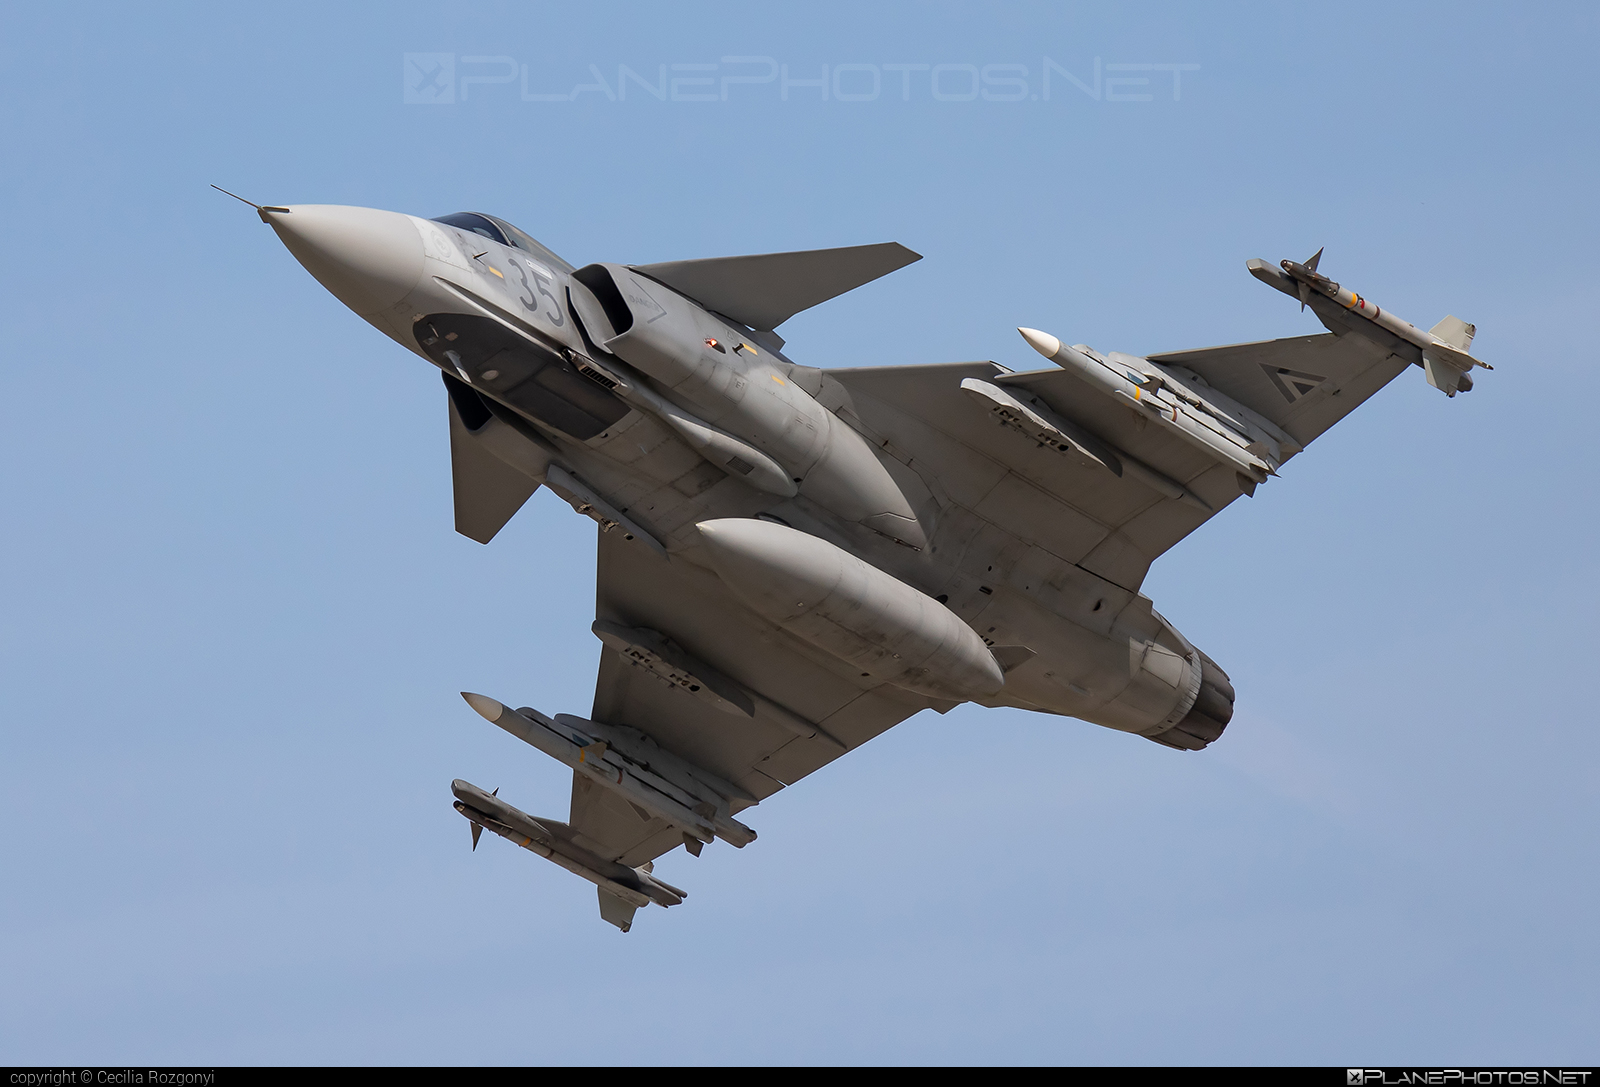 Saab JAS 39C Gripen - 35 operated by Magyar Légierő (Hungarian Air Force) #gripen #hungarianairforce #jas39 #jas39c #jas39gripen #magyarlegiero #saab